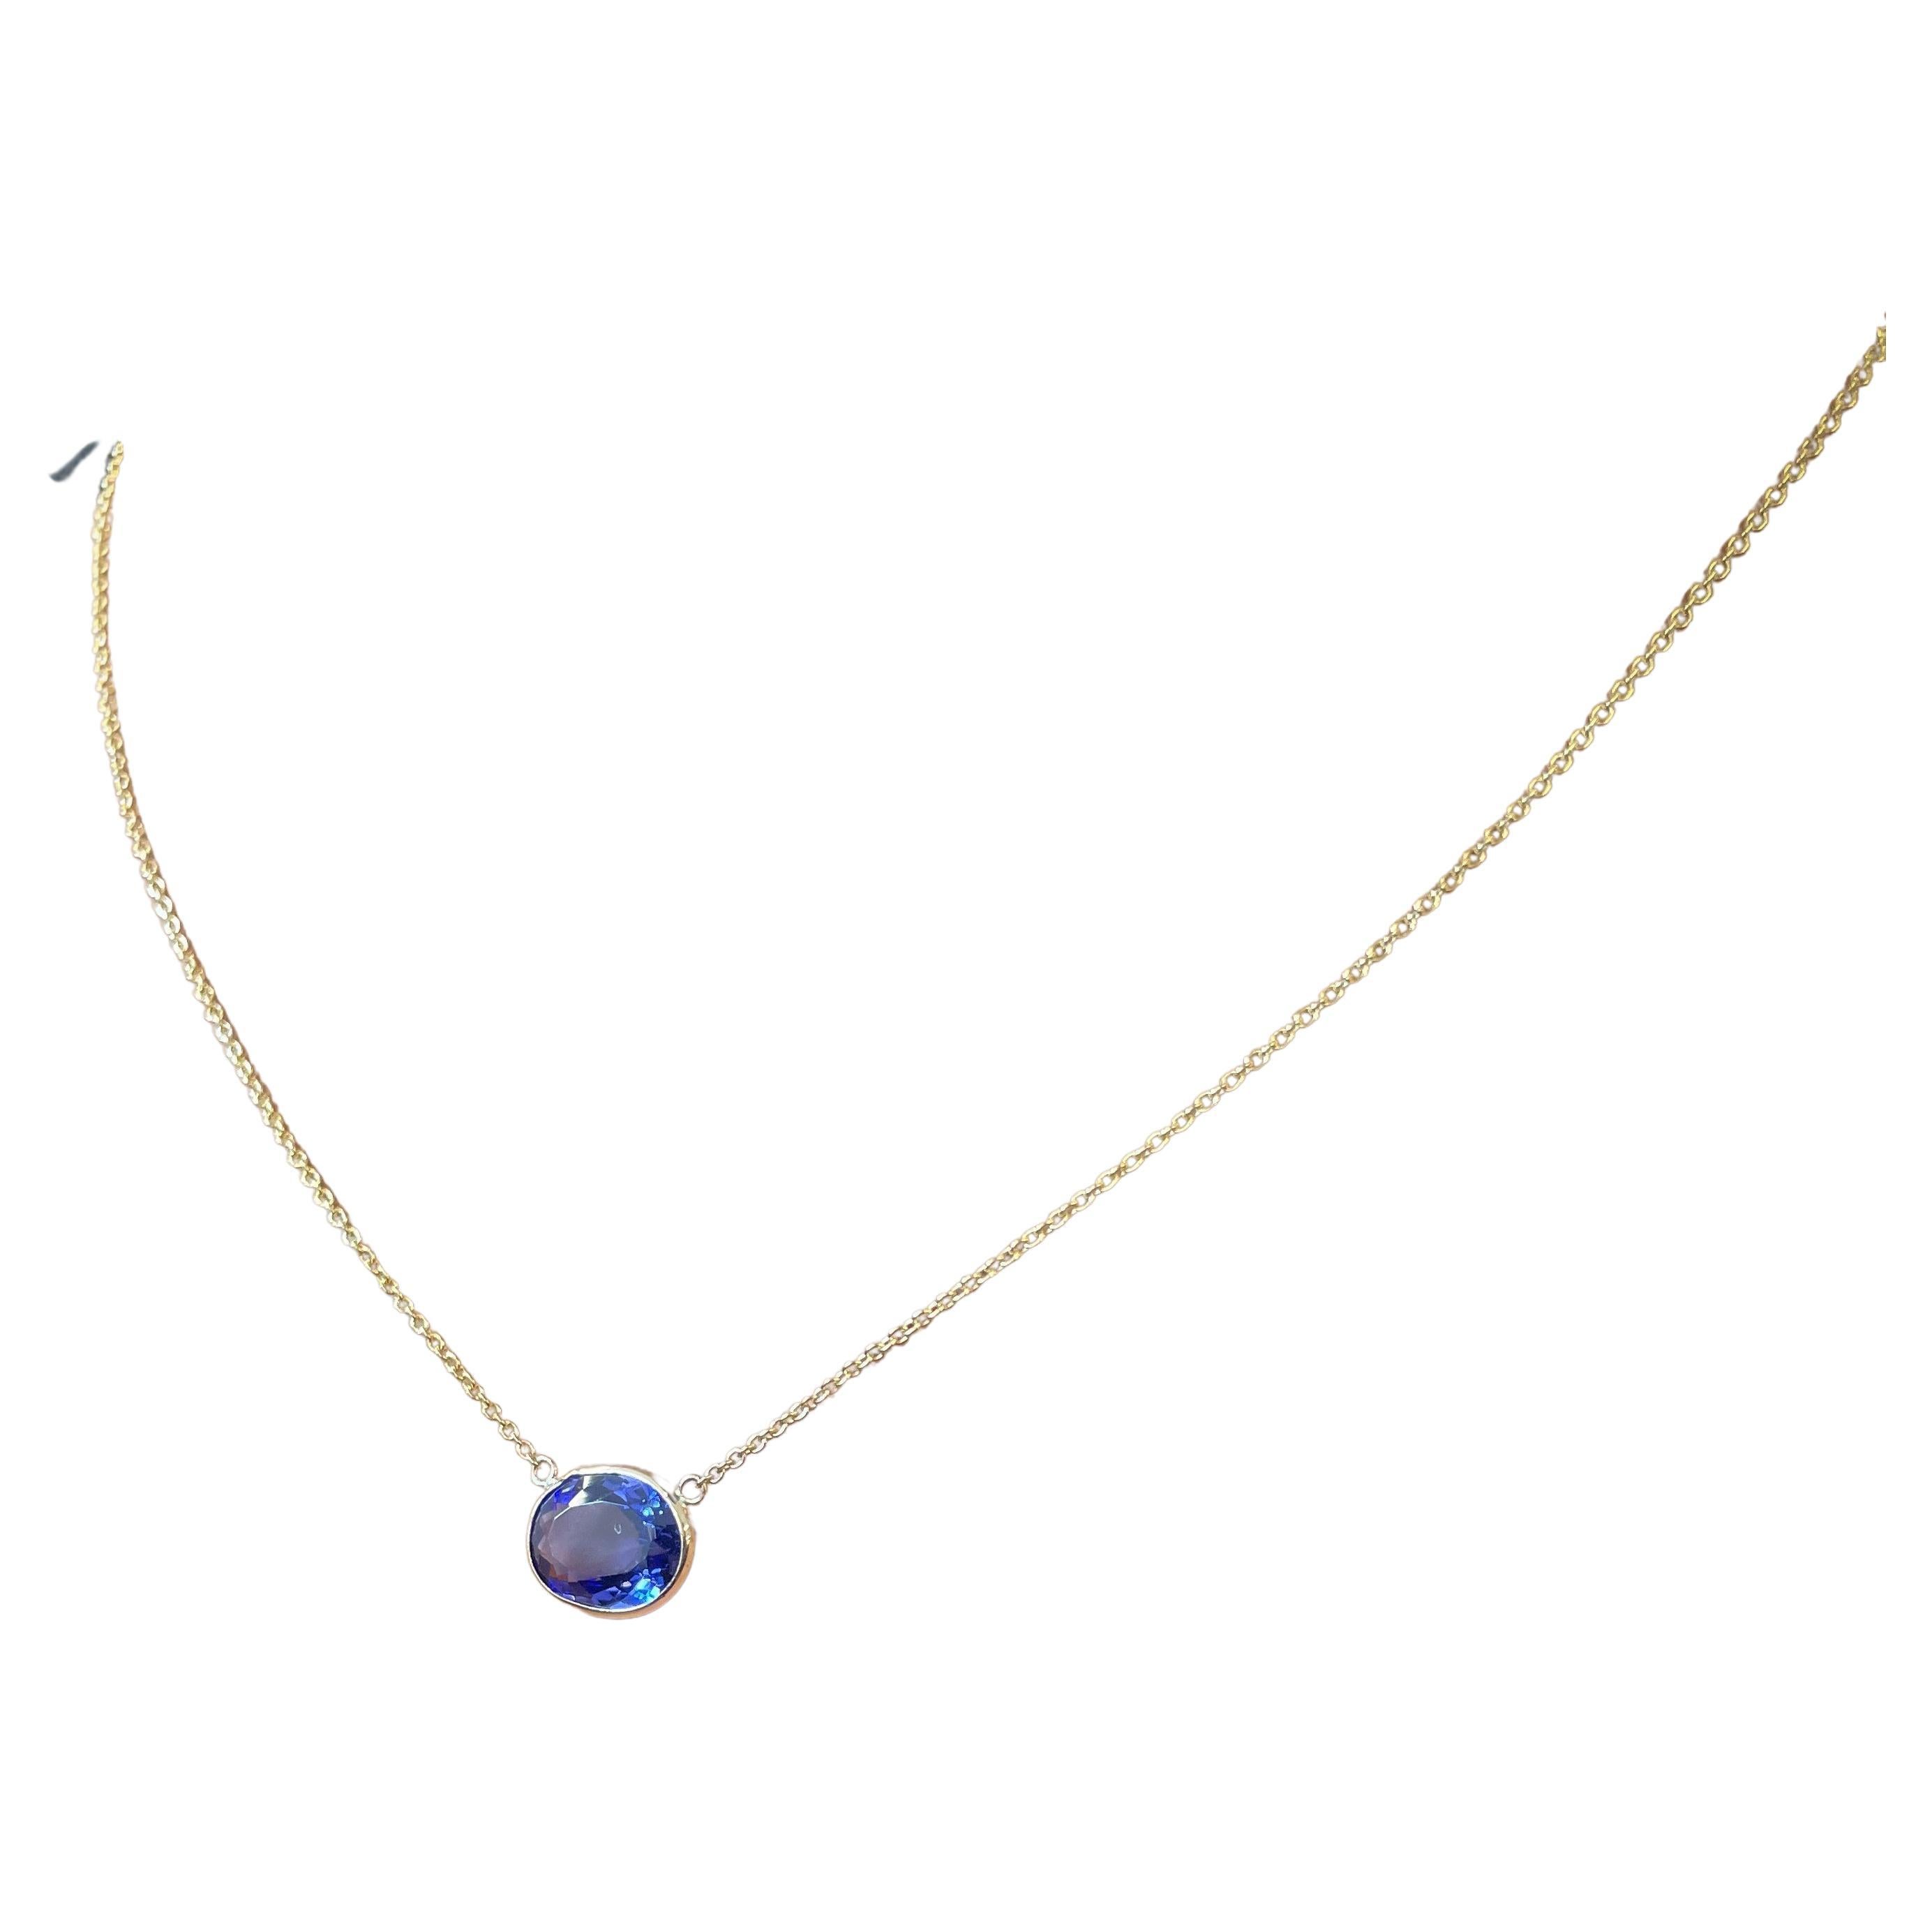 3.77 Carat Oval Blue Tanzanite Fashion Necklaces In 14k Yellow Gold  For Sale